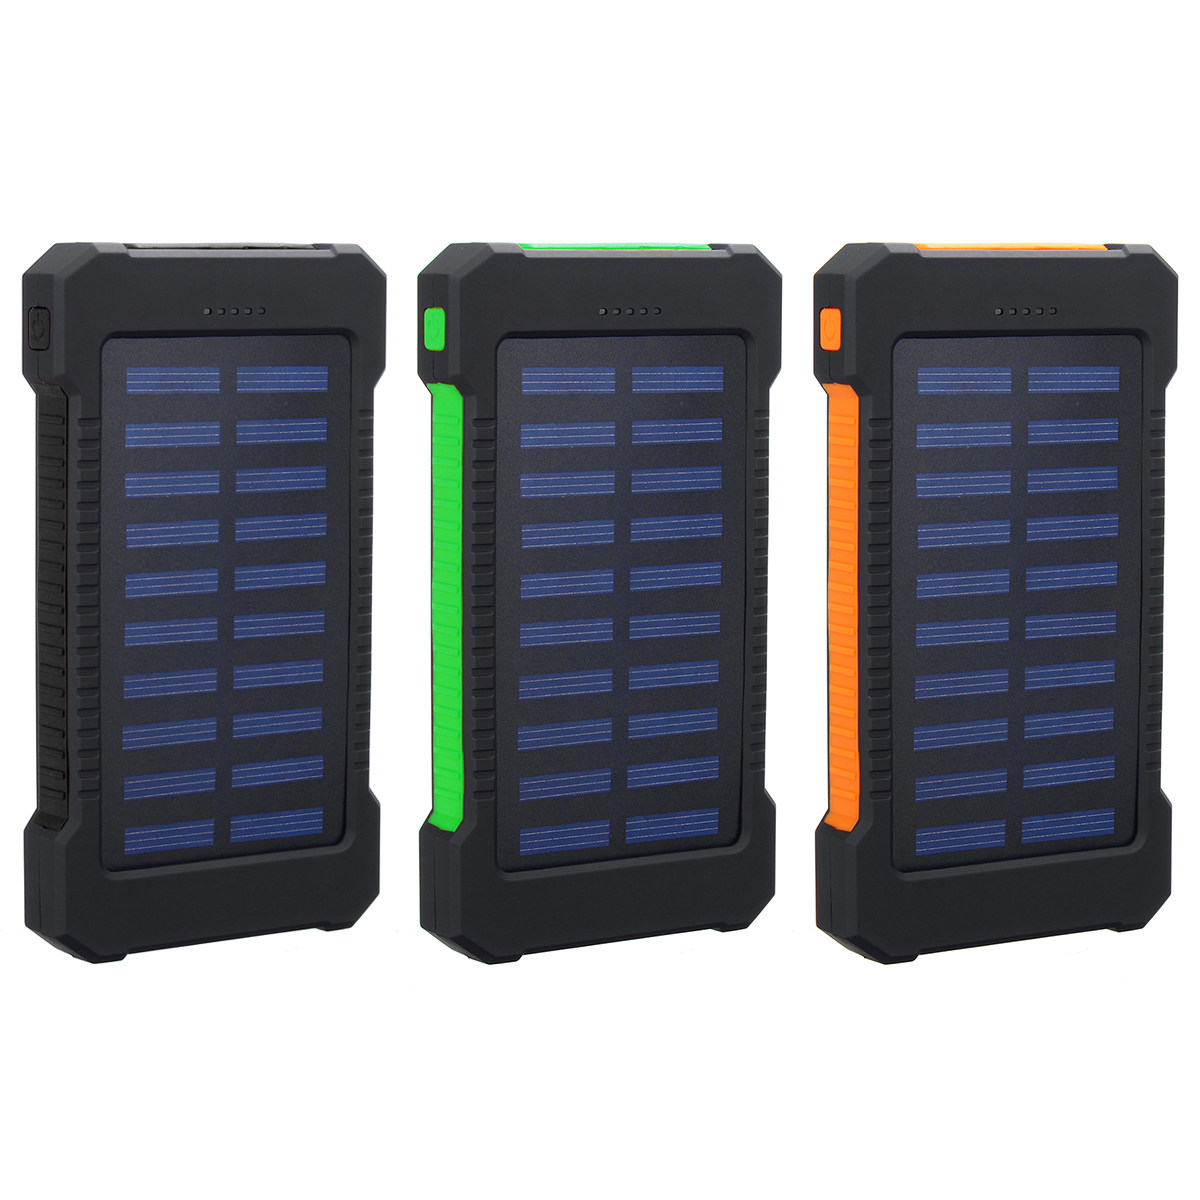 Solar-Power-Bank-8000mAh-Portable-Waterproof-Solar-Charger-with-LED-Light-1672880-1